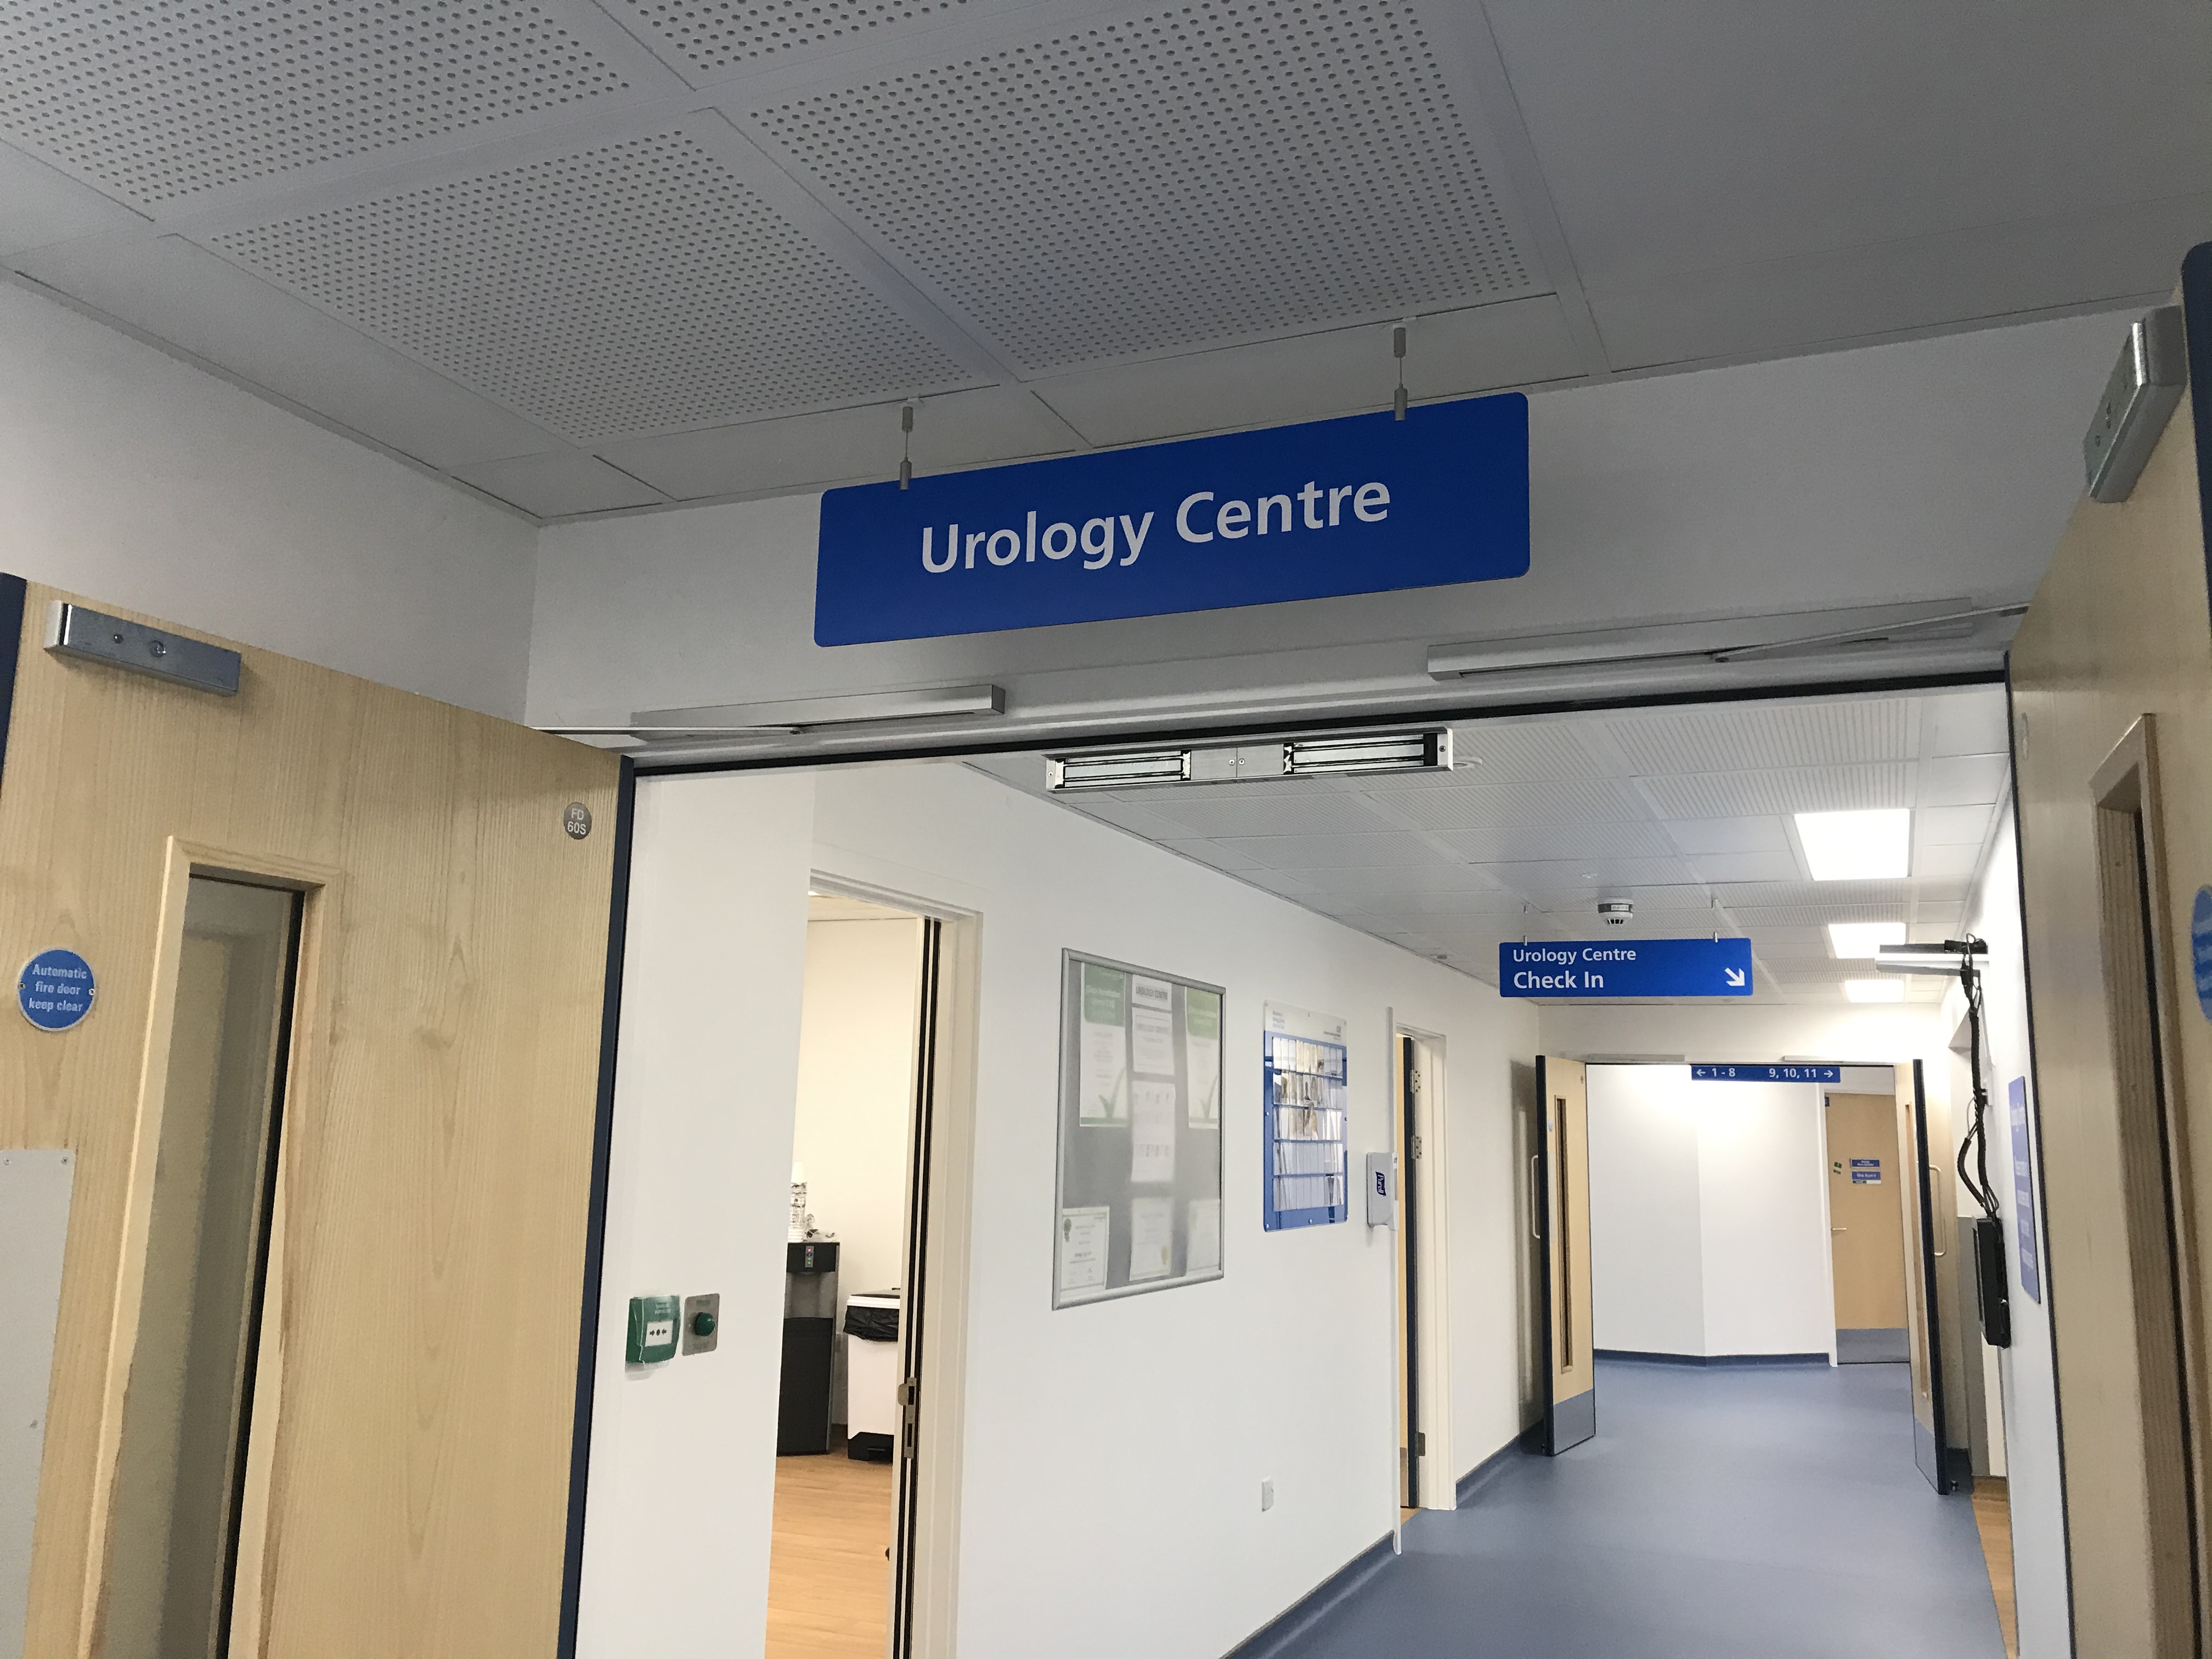 Entrance sign to the new urology centre